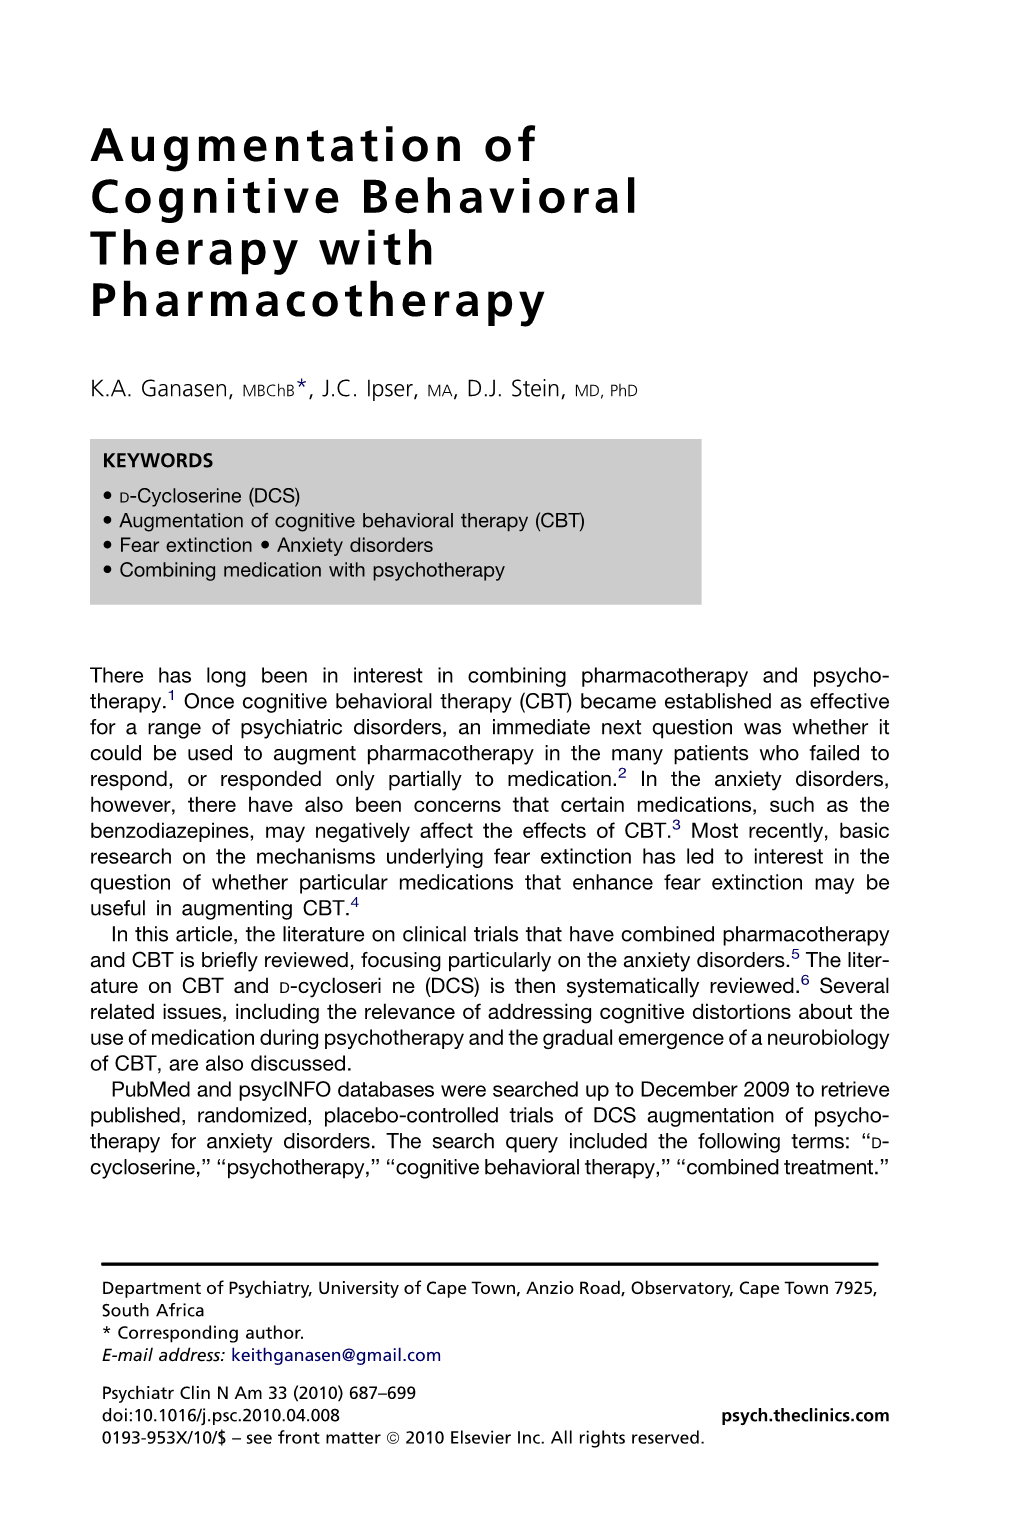 Augmentation of Cognitive Behavioral Therapy with Pharmacotherapy